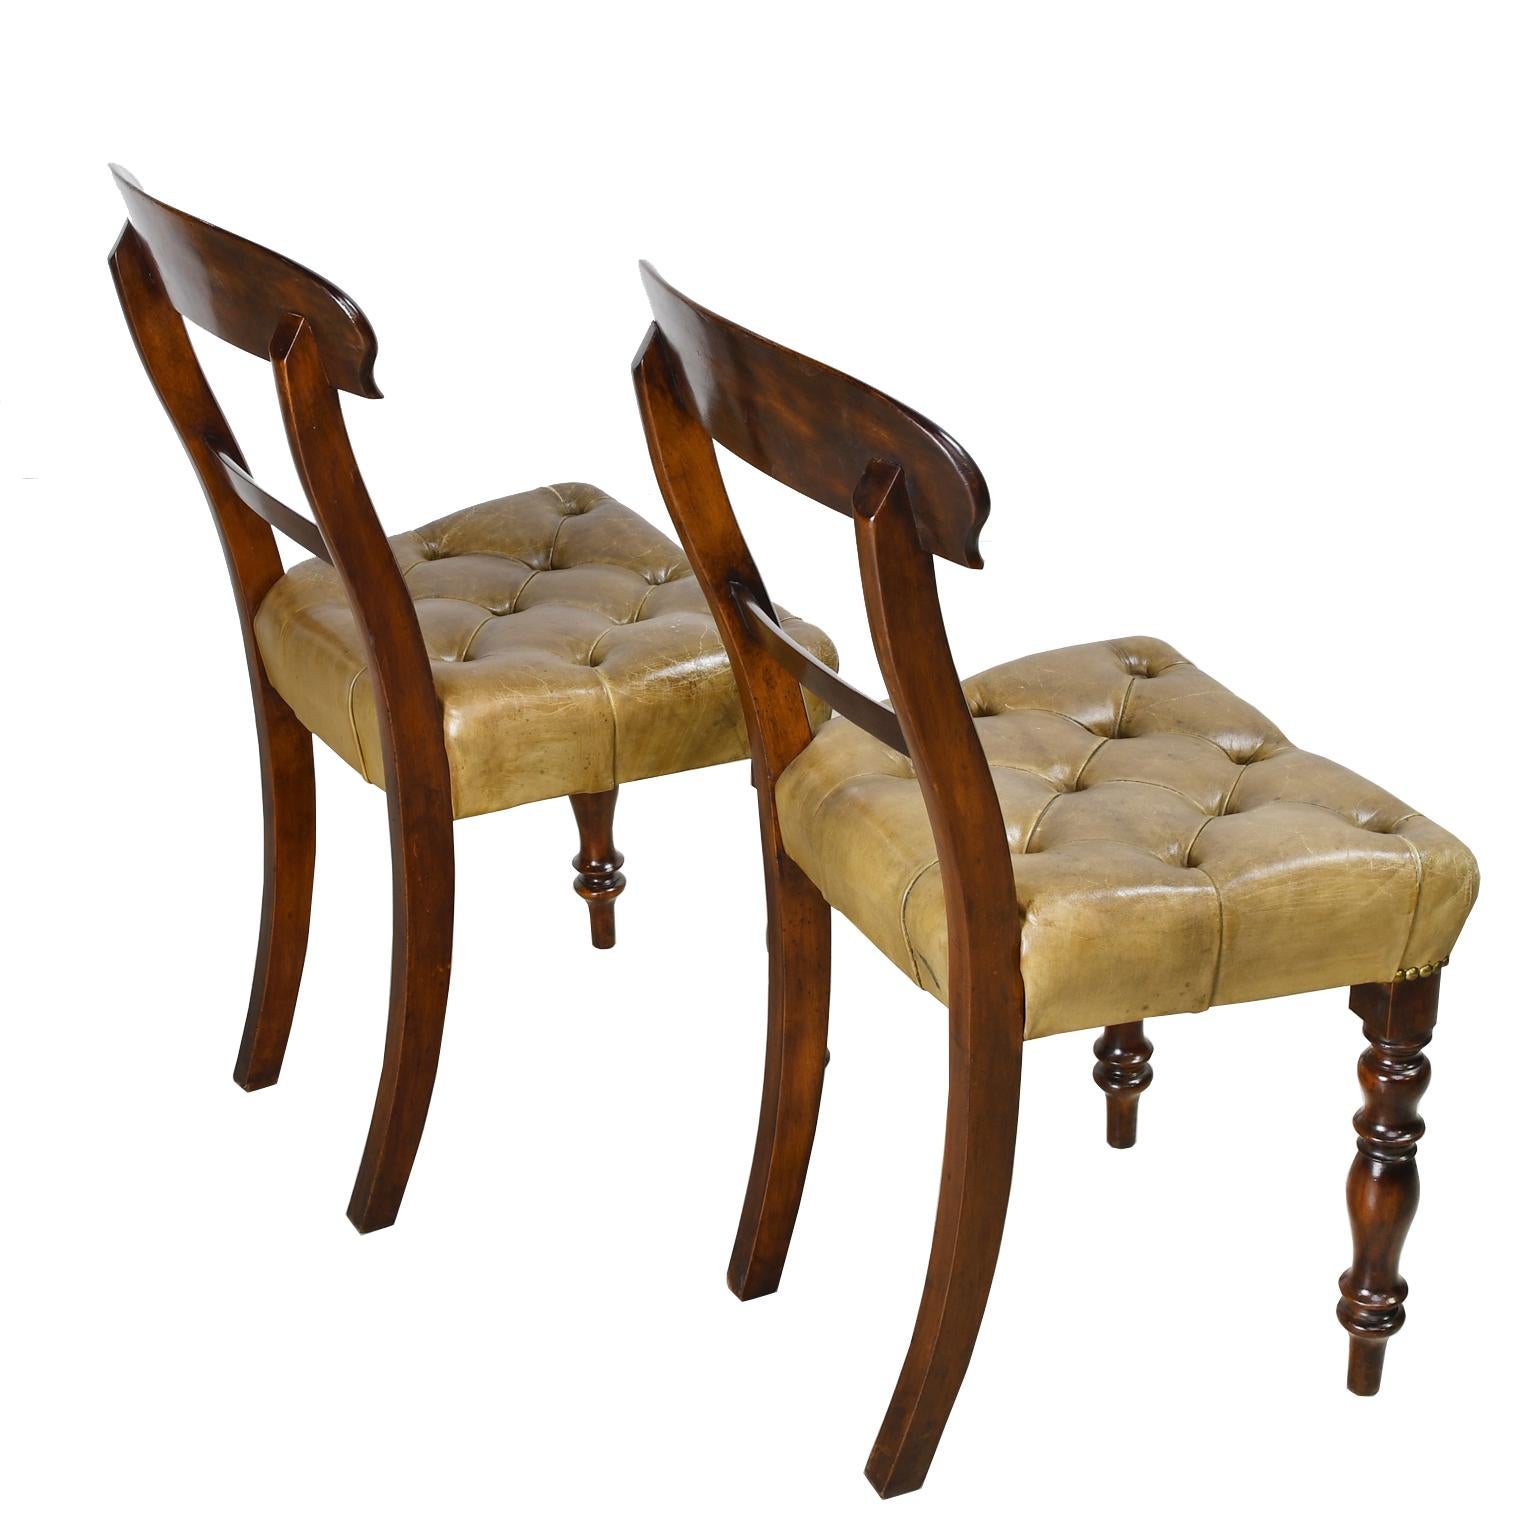 Pair of Early Victorian Mahogany Chairs with Leather Upholstery, England 3